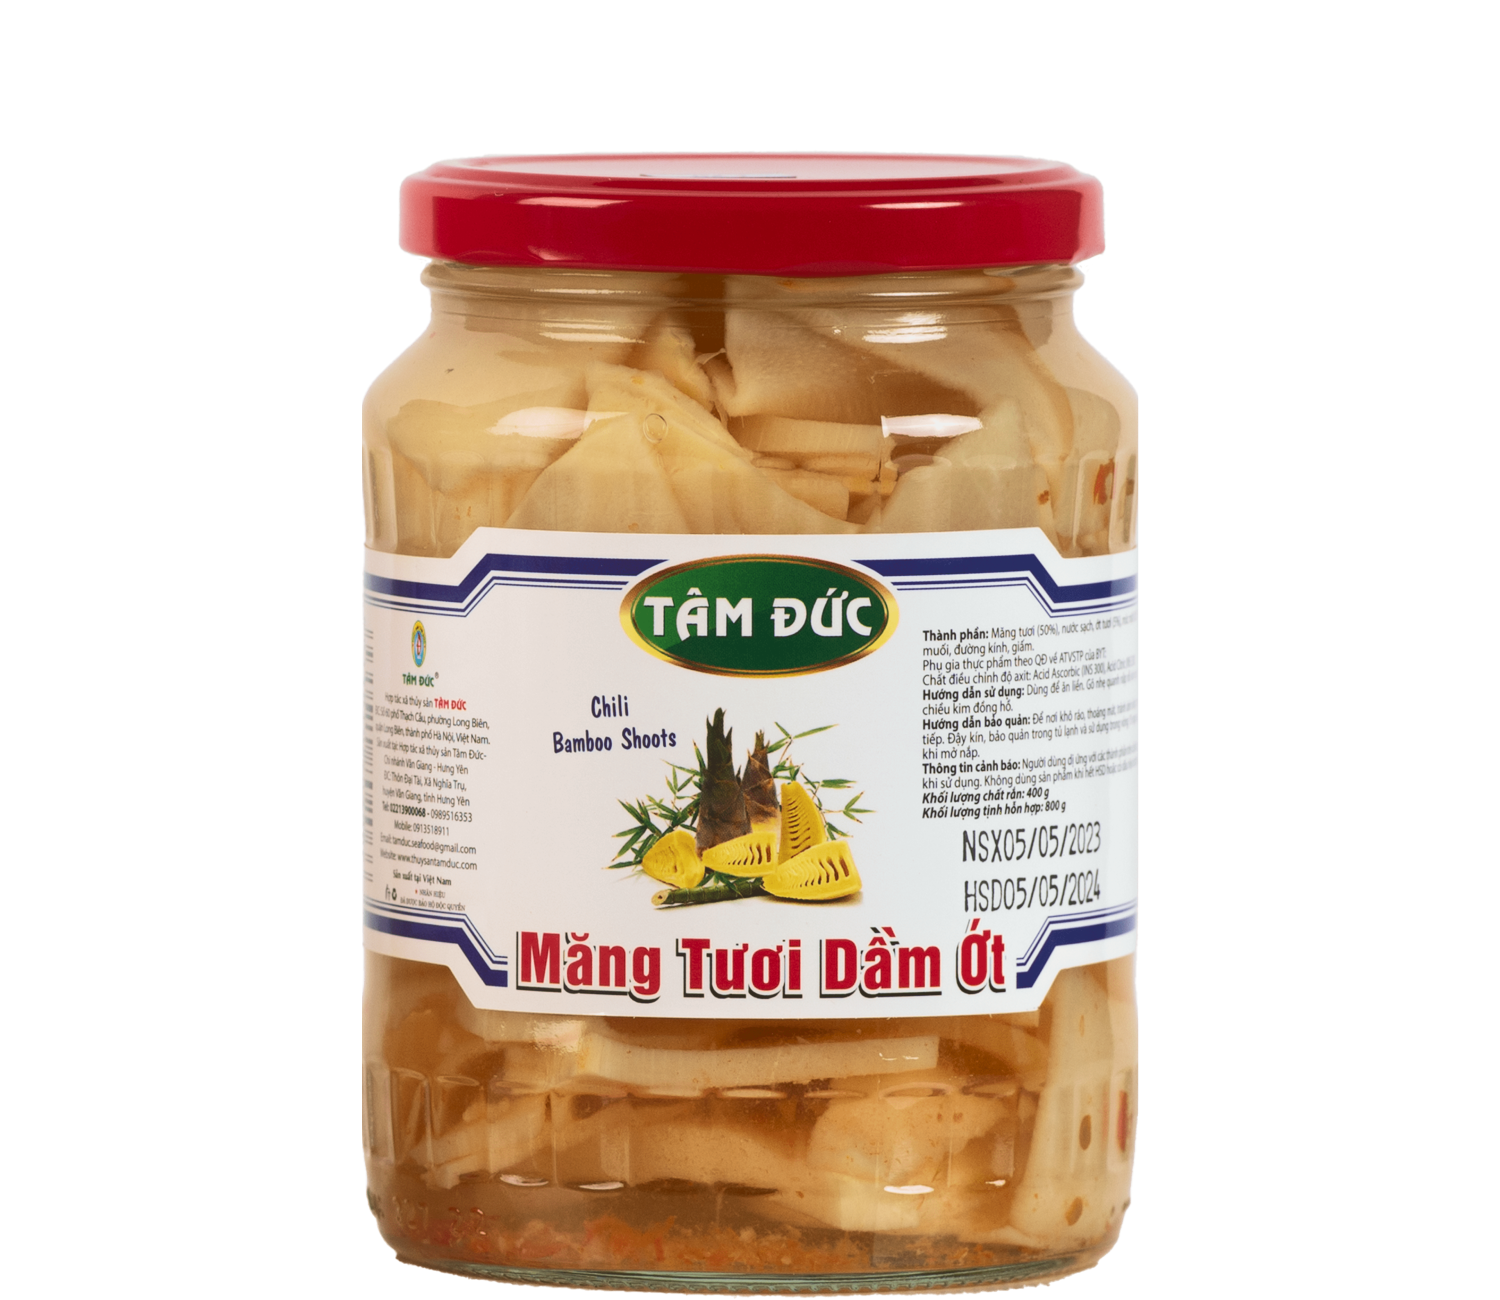 Fresh bamboo shoots pickled with chili